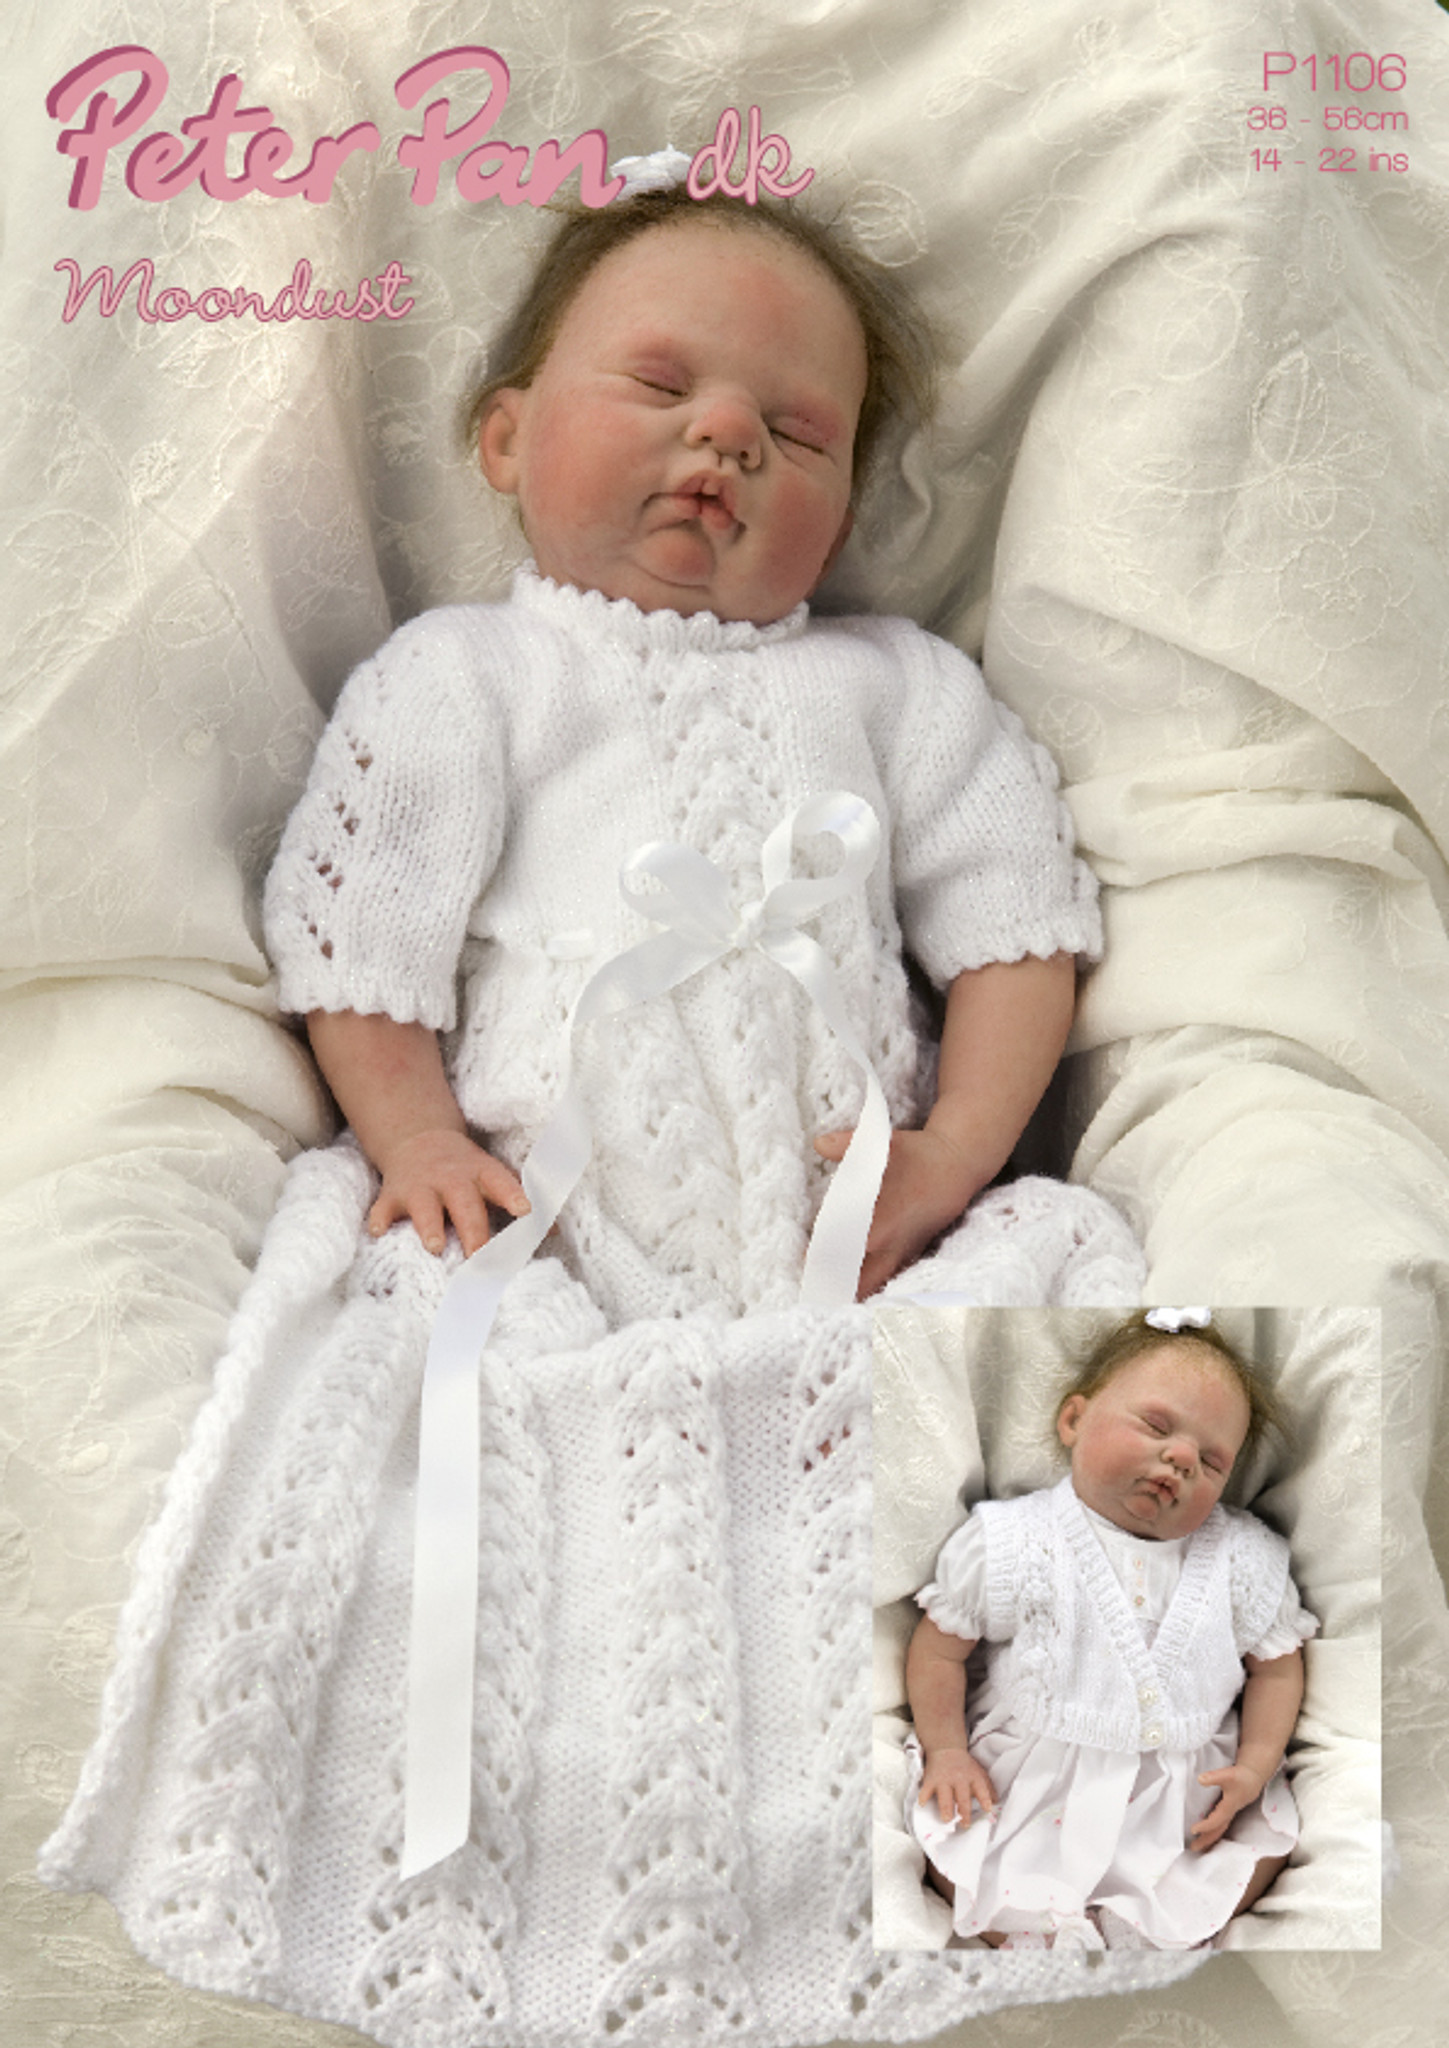 Filet Crochet Floral And Scroll Christening Gown Pattern | eBay